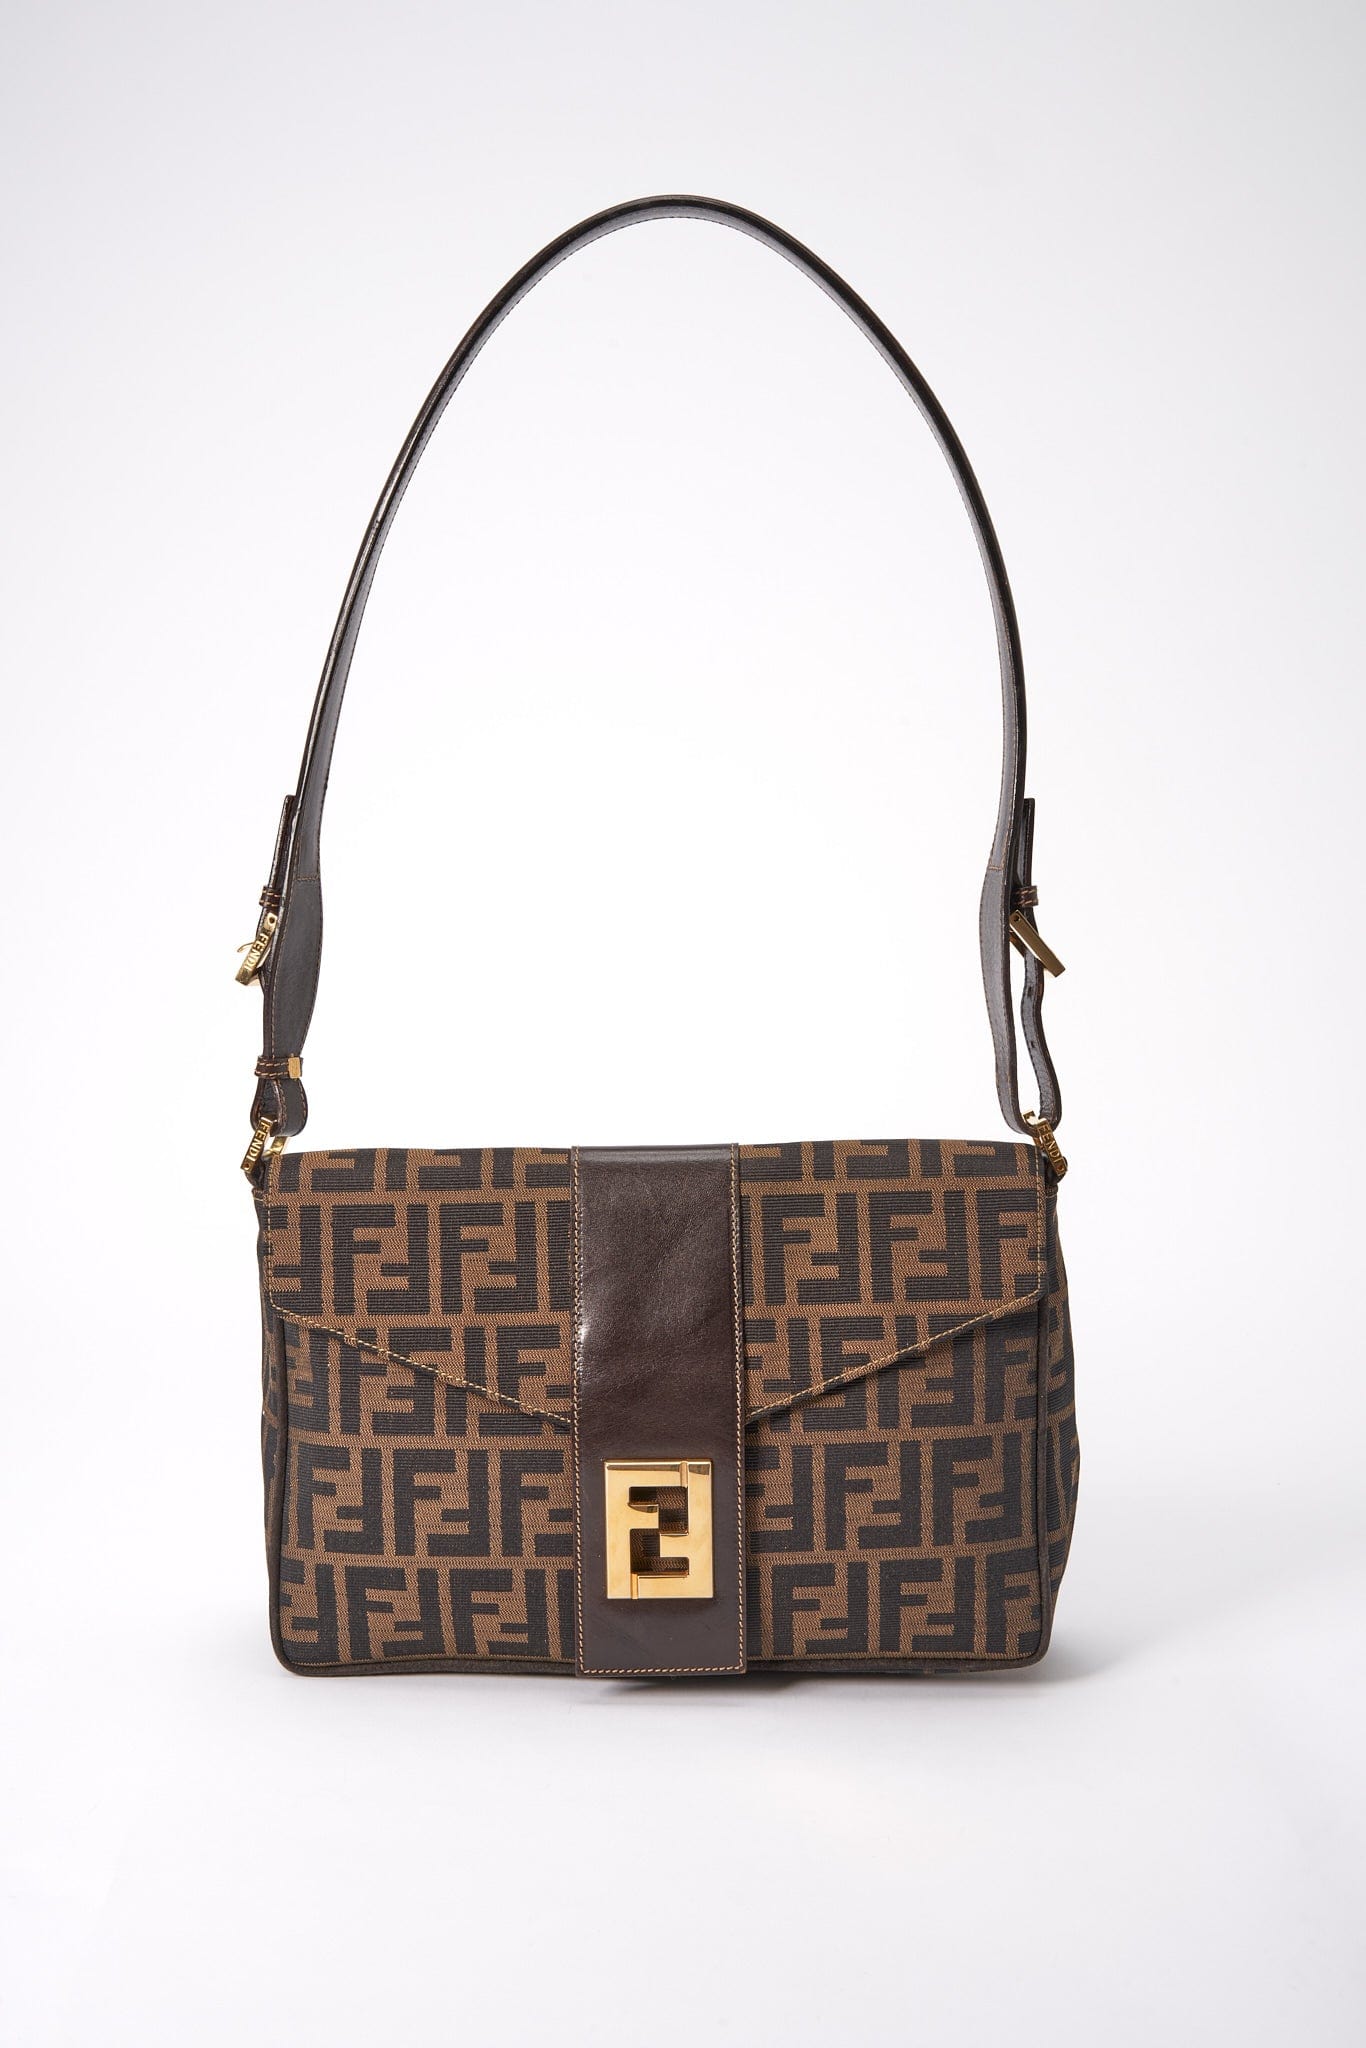 The Making of an Especially Intricate Fendi Baguette Bag - The New